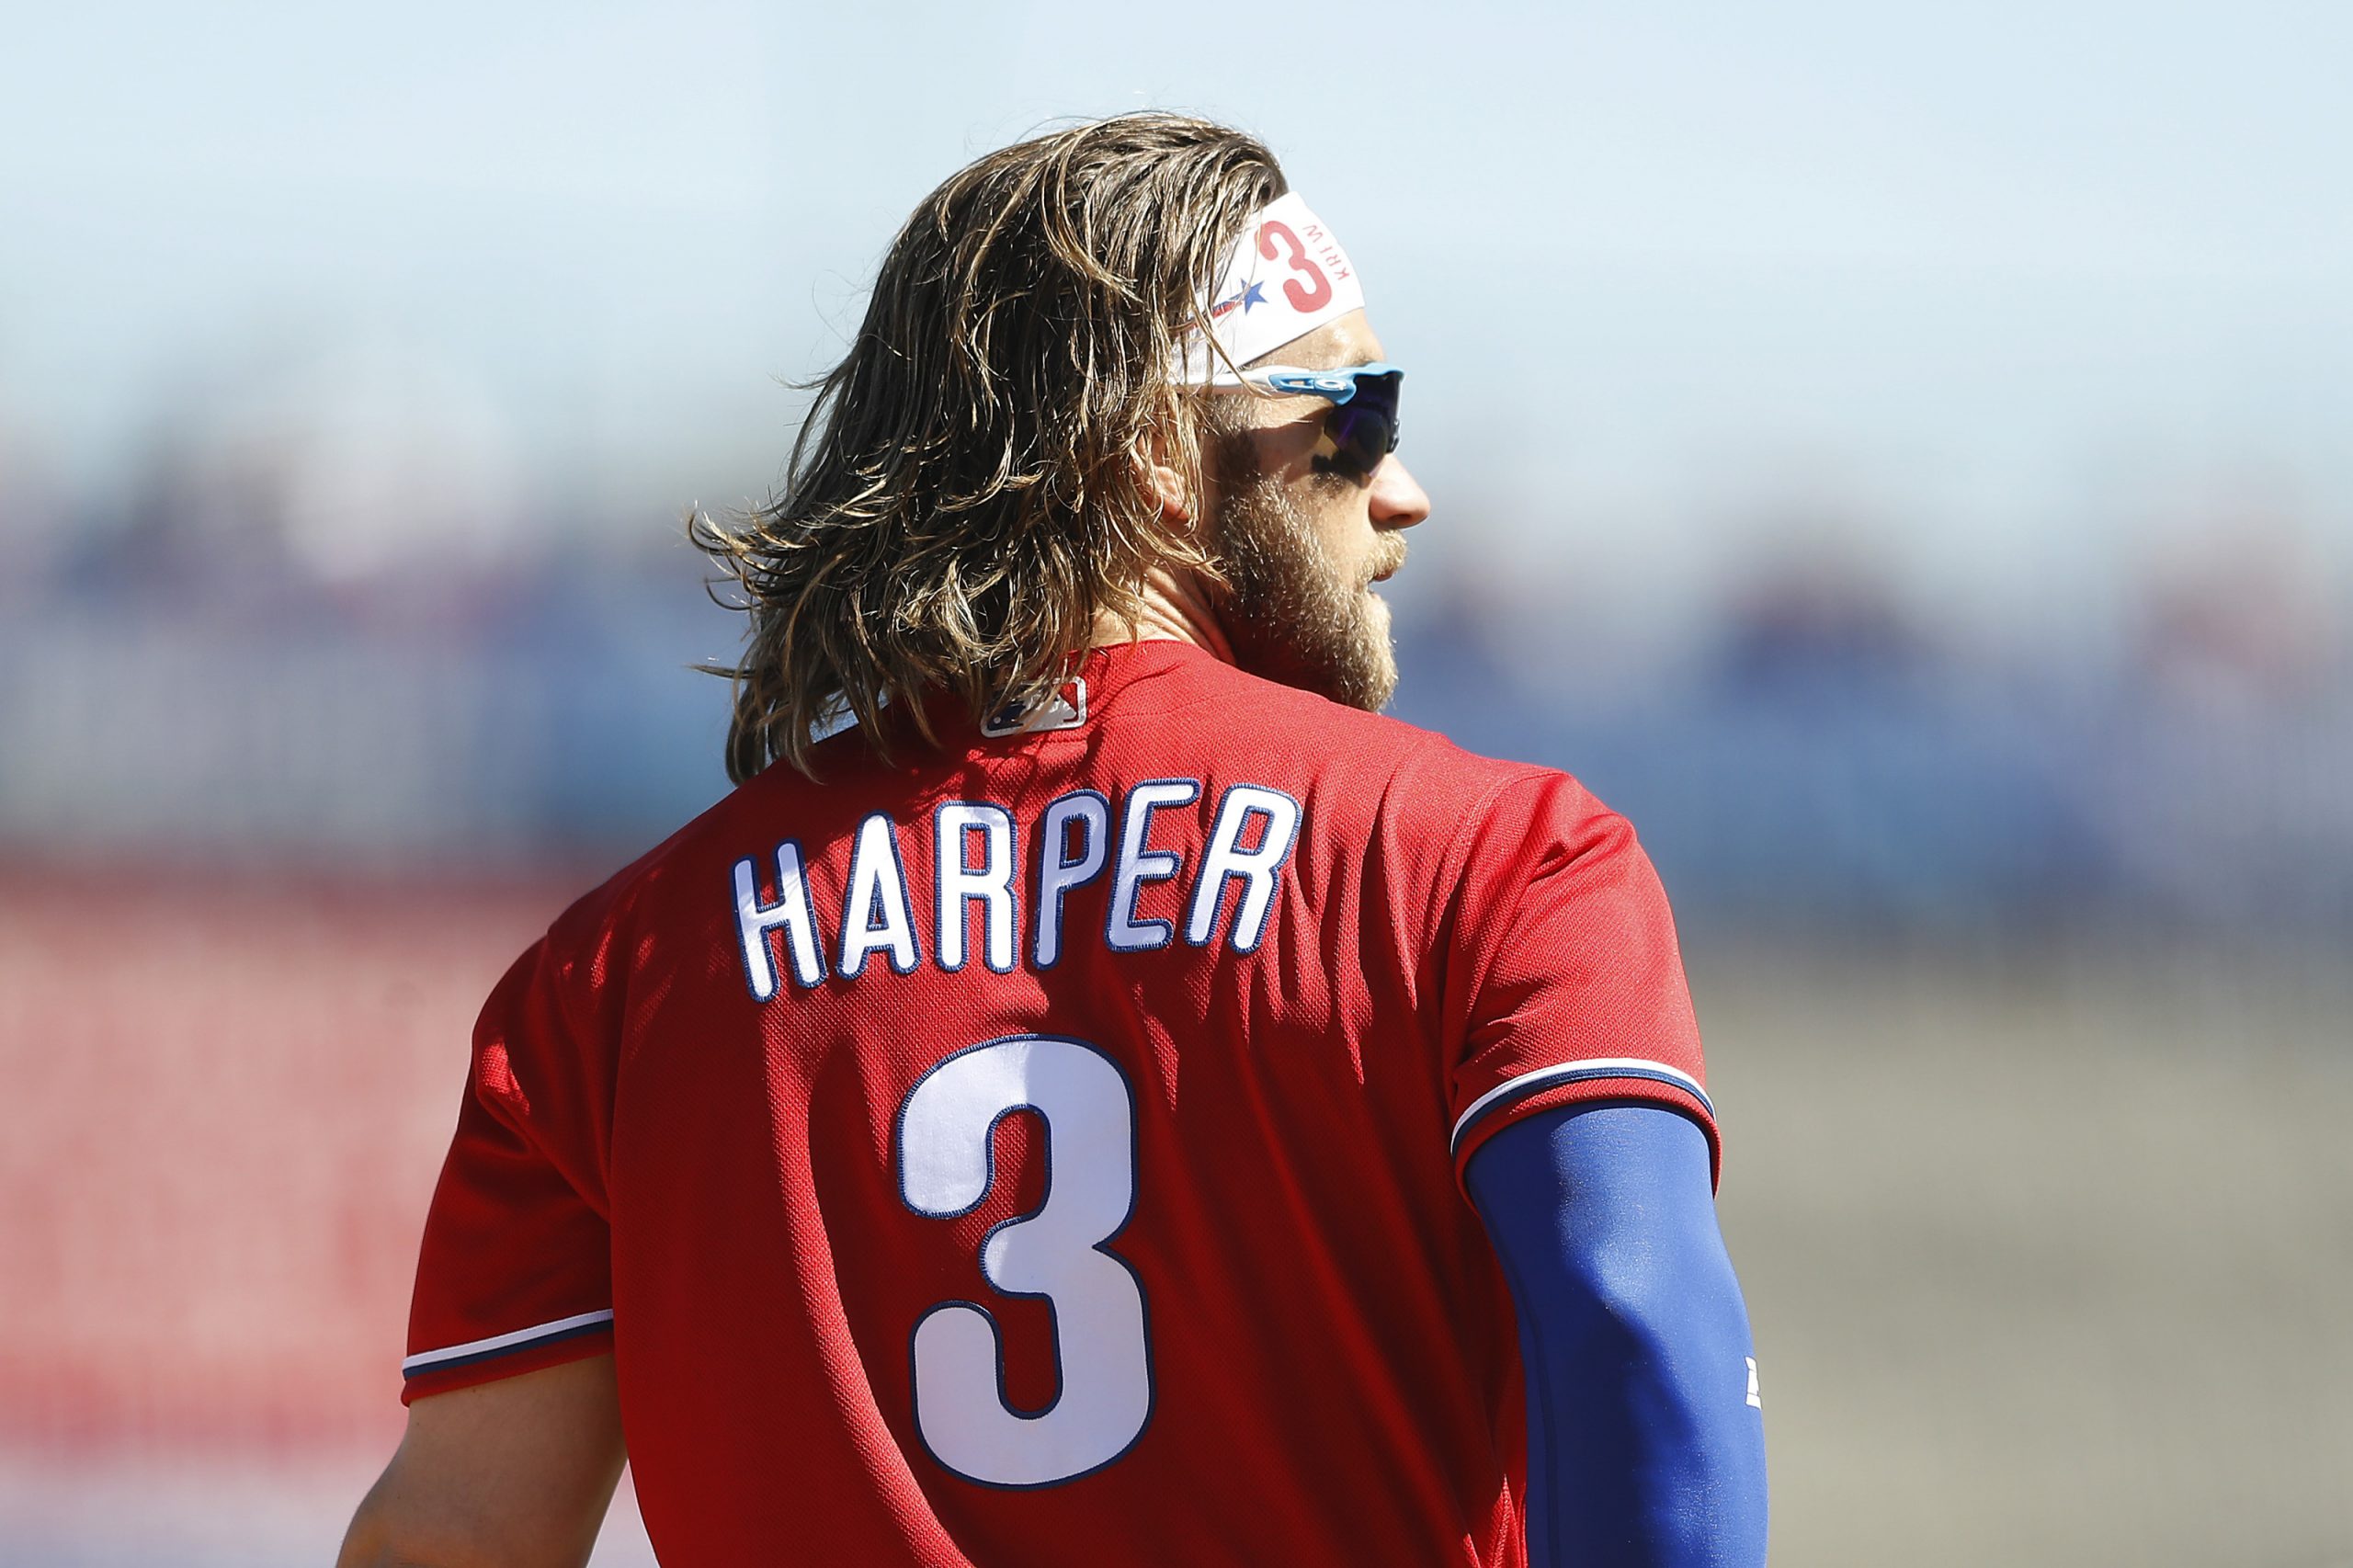 cool 20 Awesome Bryce Harper's Haircuts - Legendary Inspiration Check more  at